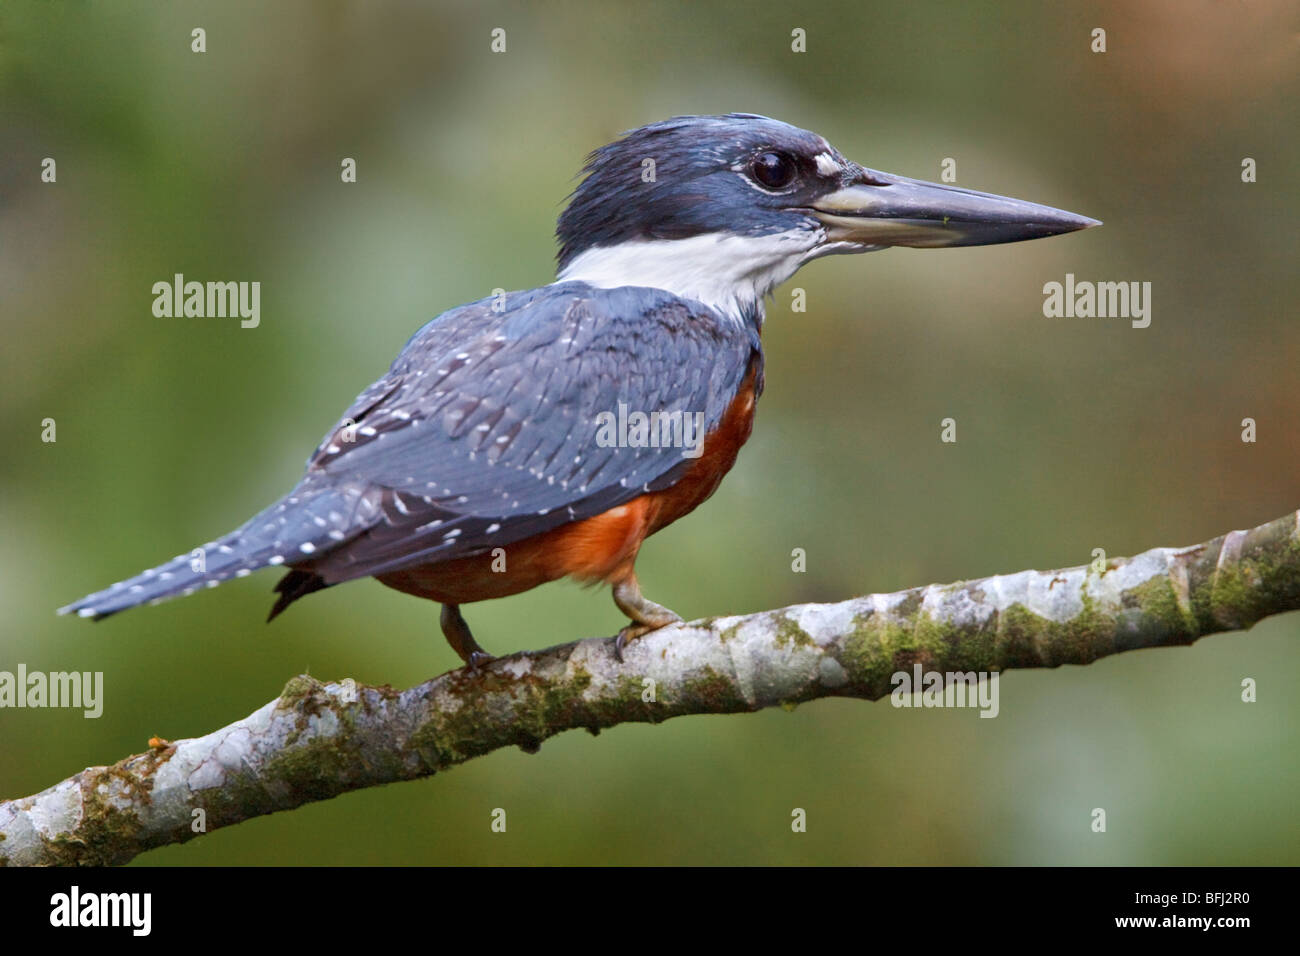 Ringed Kingfisher (Megaceryle torquata) perched on a branch near the Napo River in Amazonian Ecuador. Stock Photo